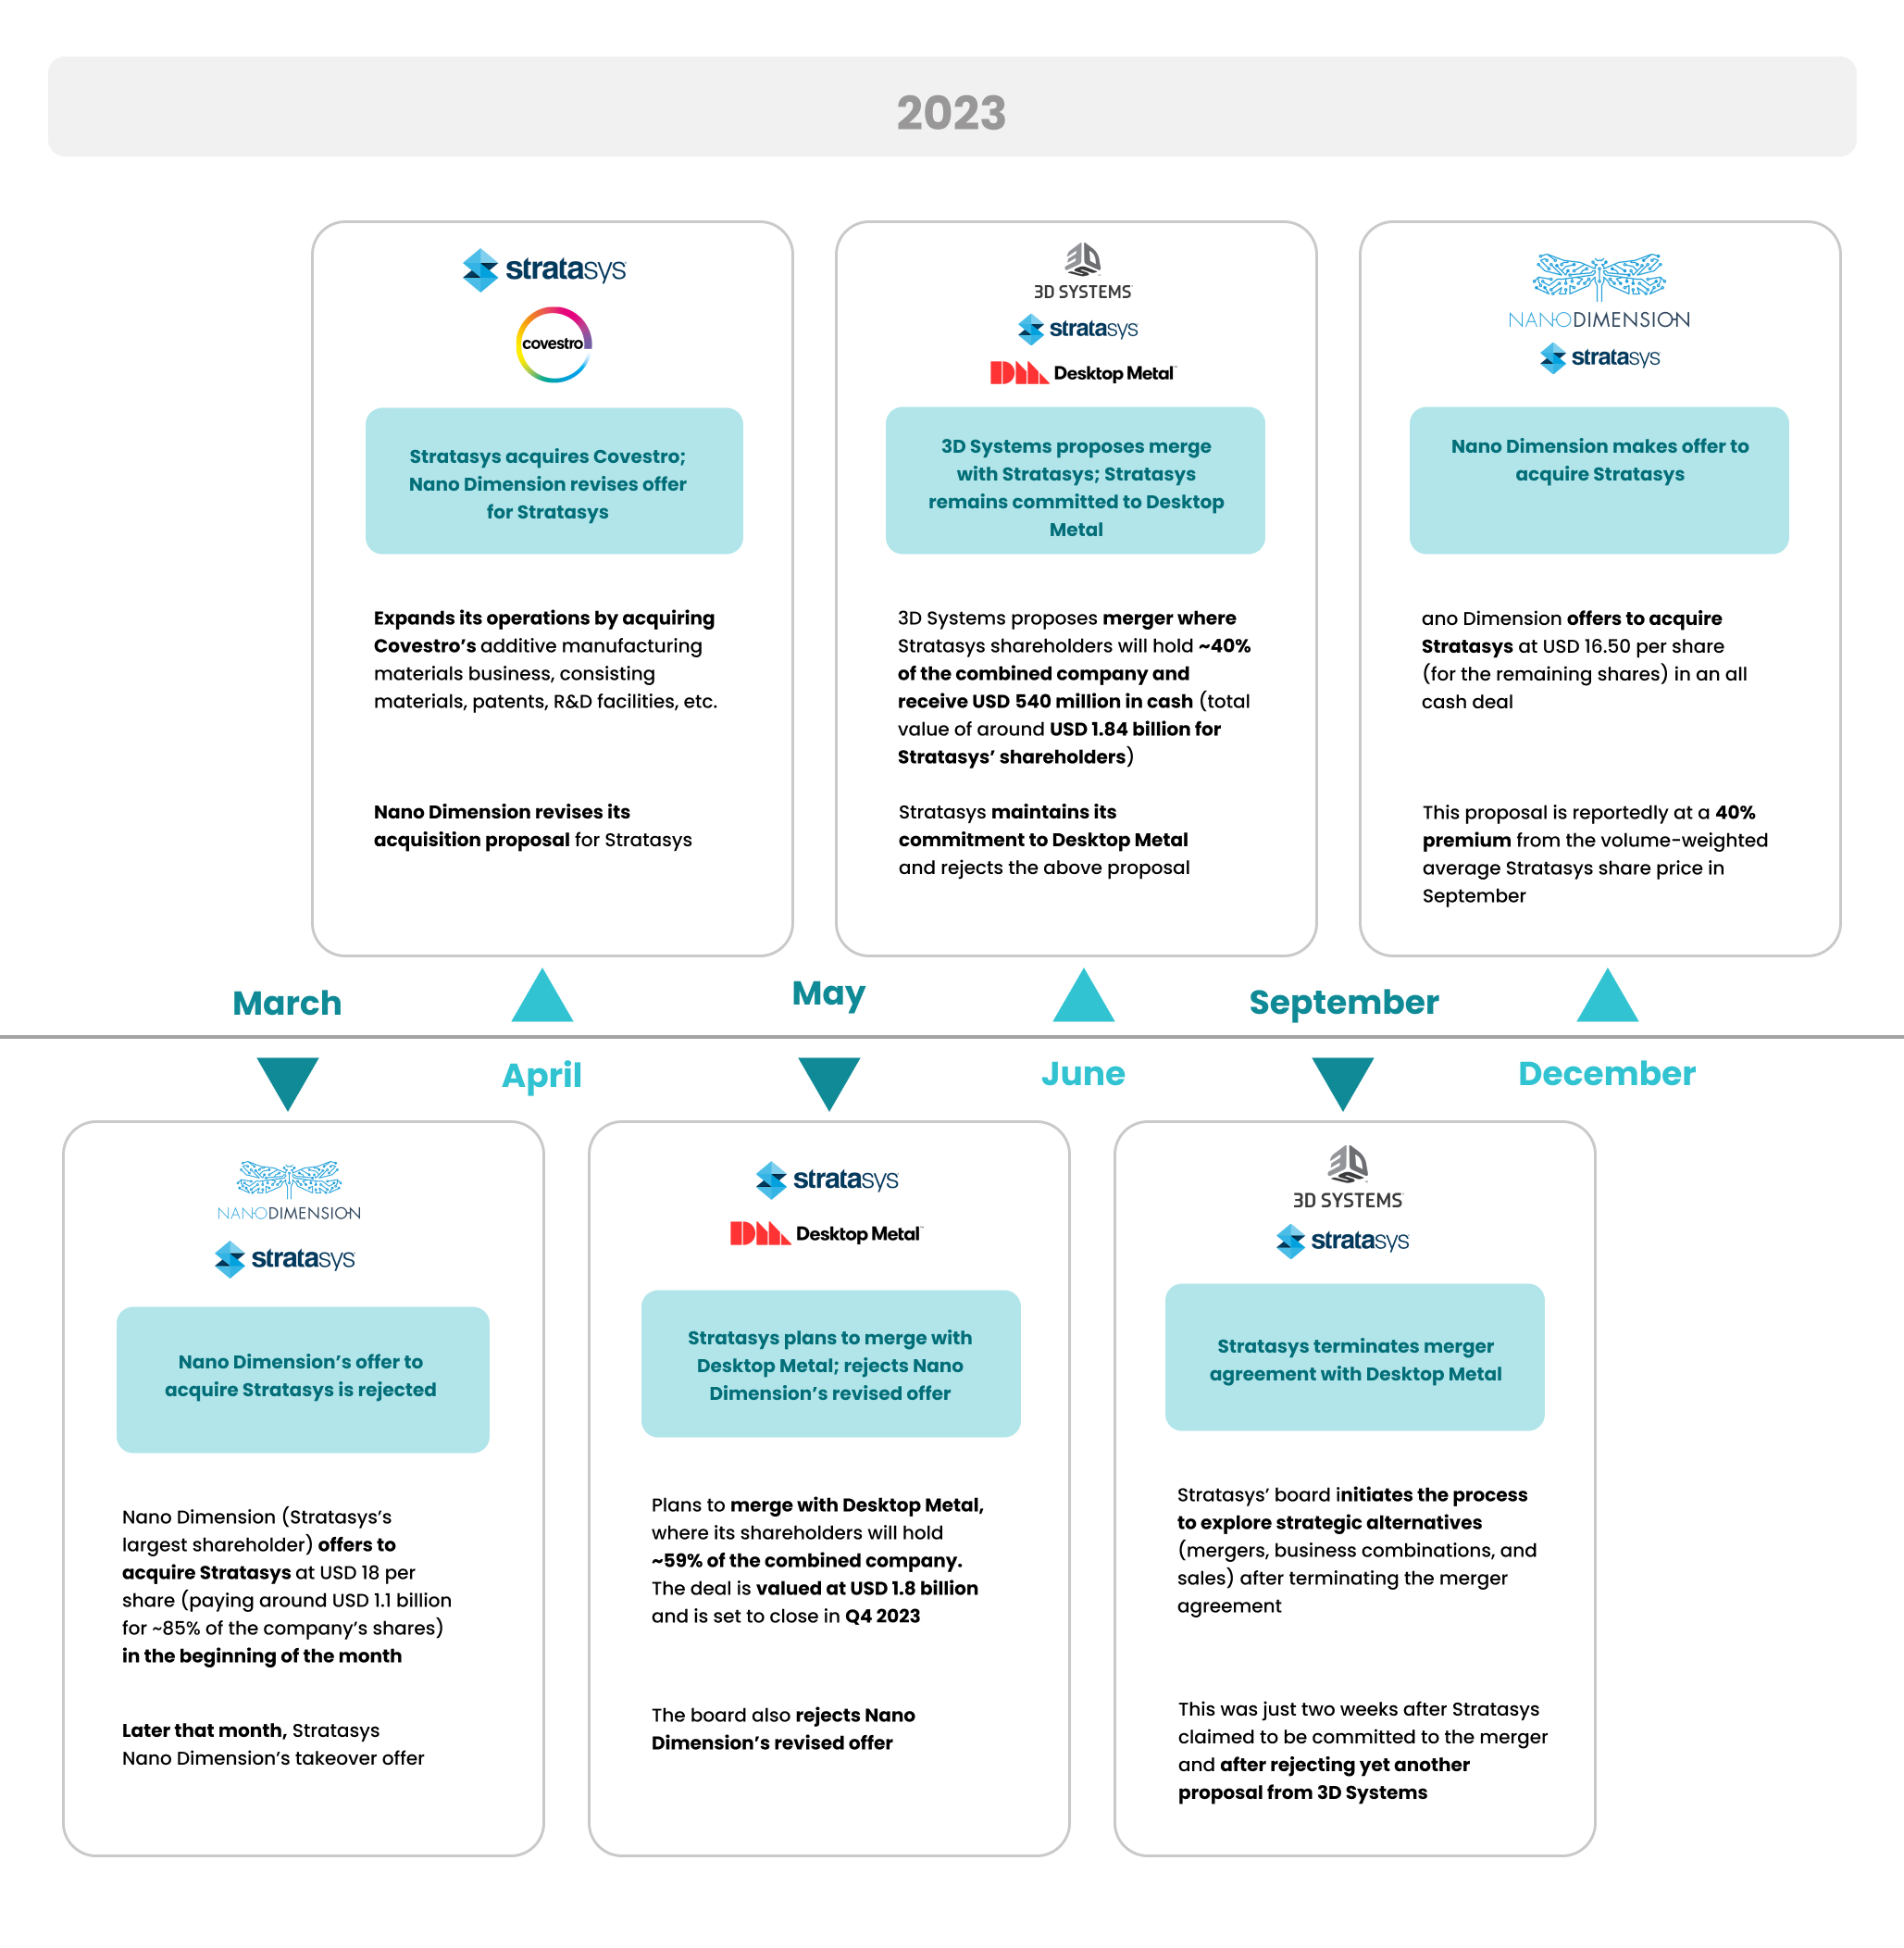 Timeline of Stratasys’ M&A activity in 2023